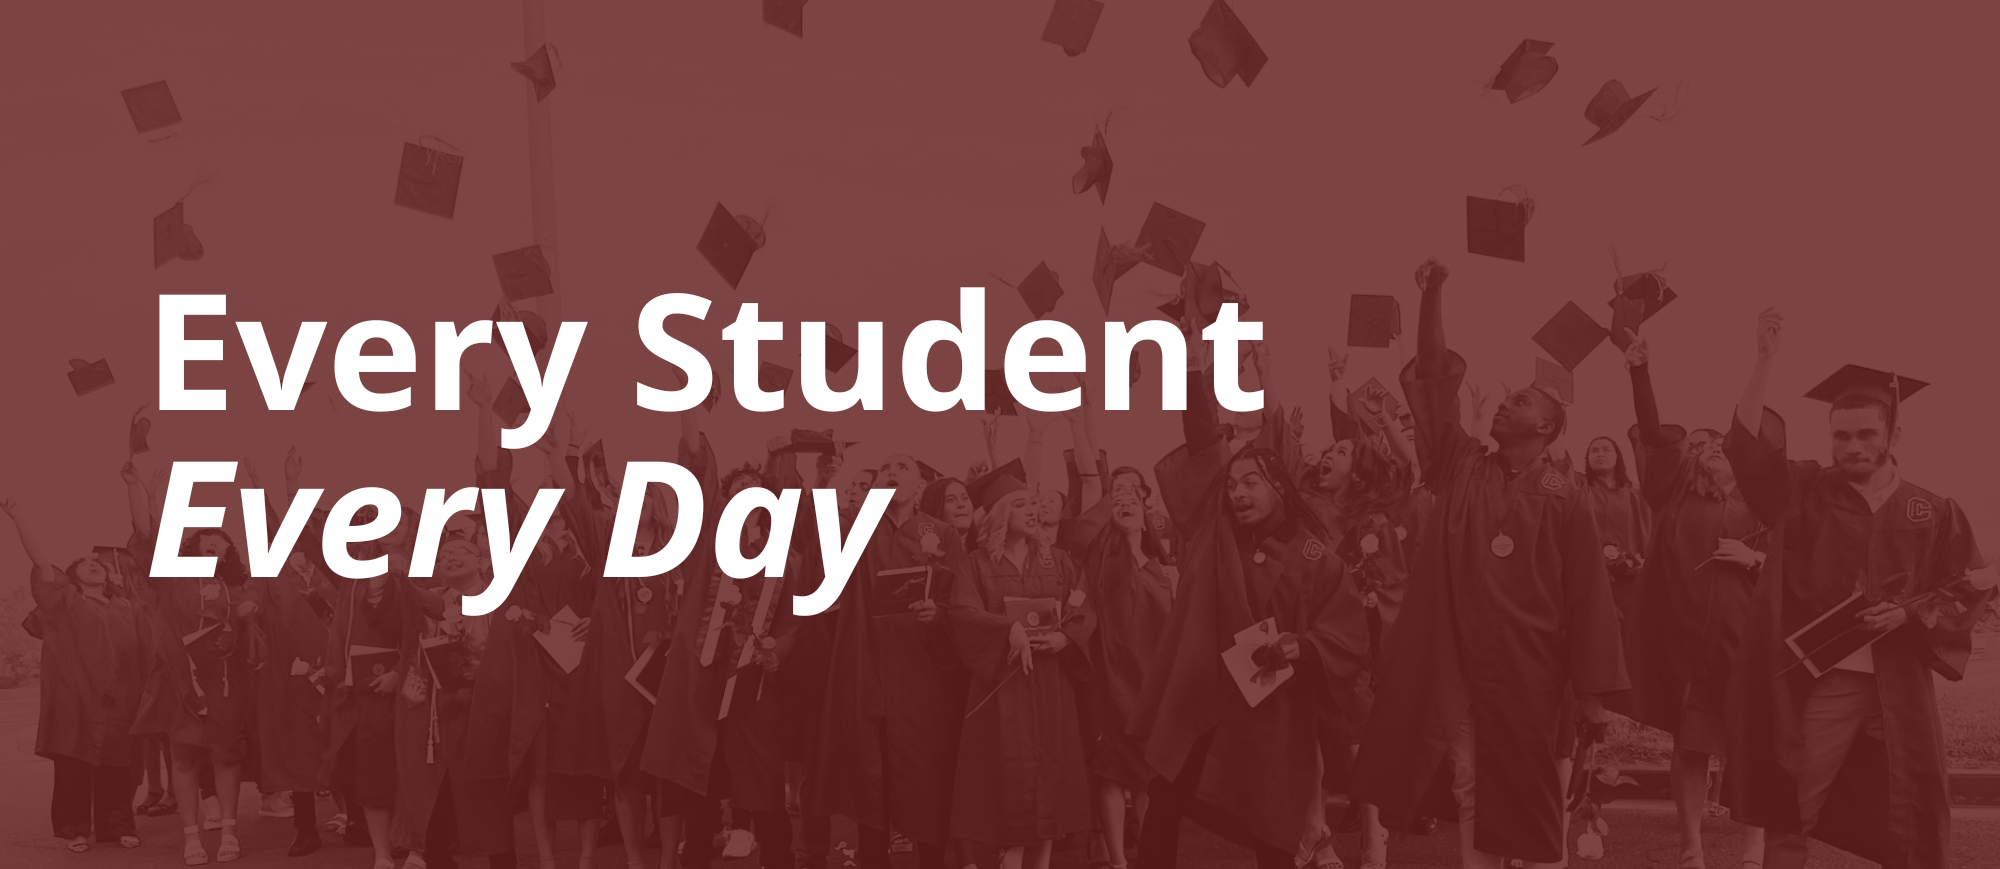  'Every student every day' overlaid on a picture of graduates throwing their caps.